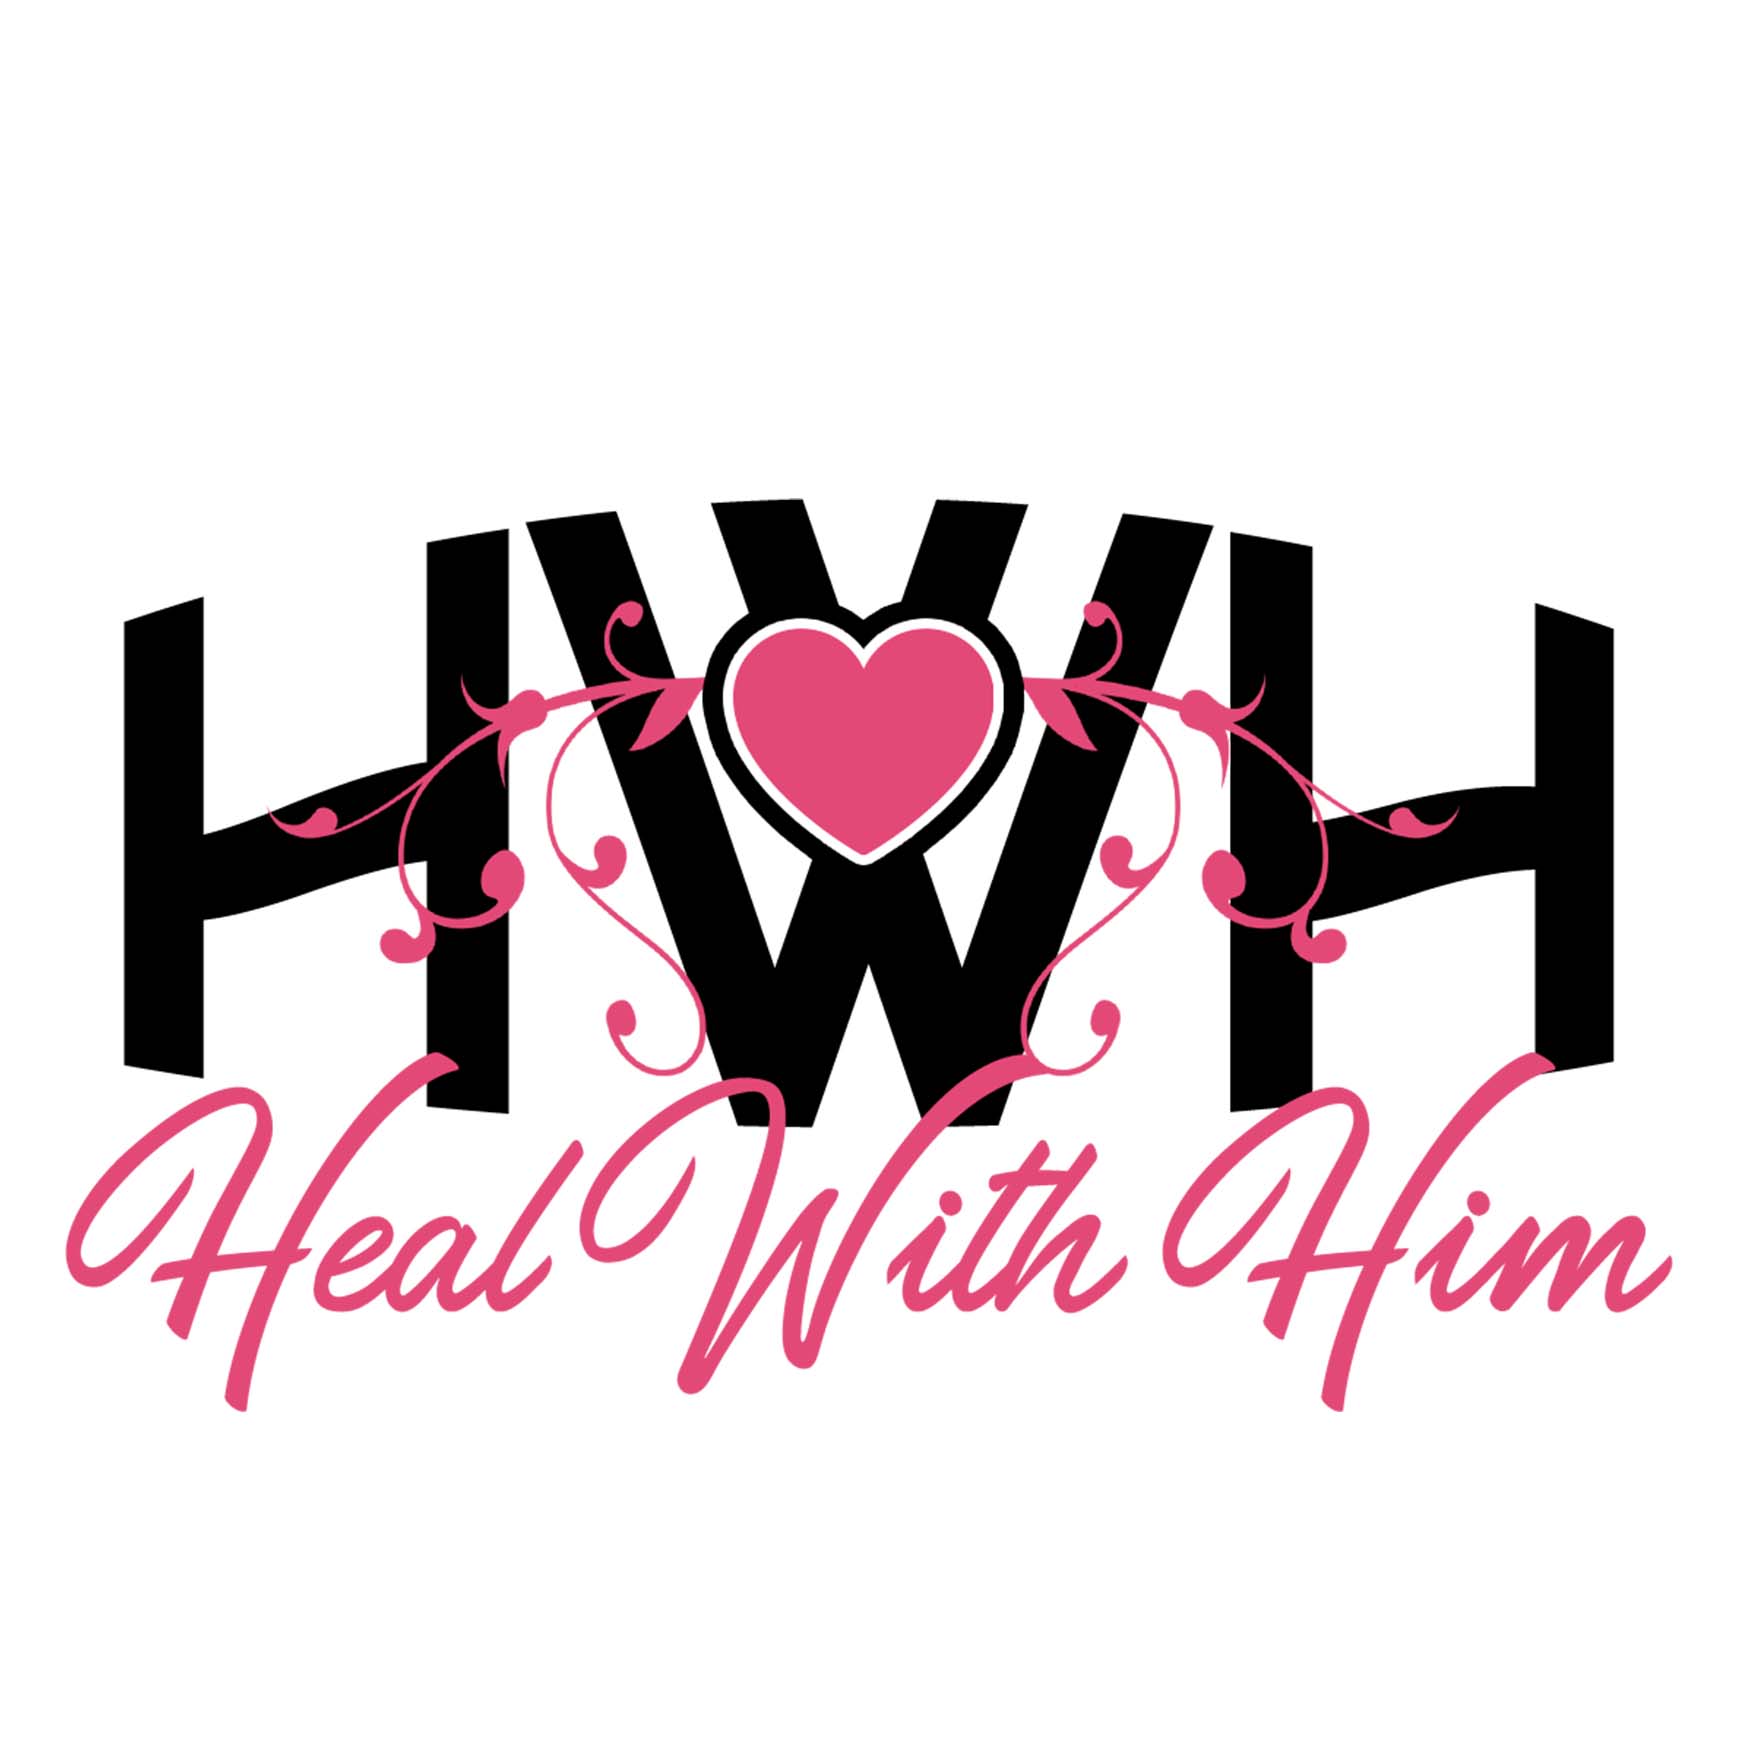 Heal With Him (PINK logo)